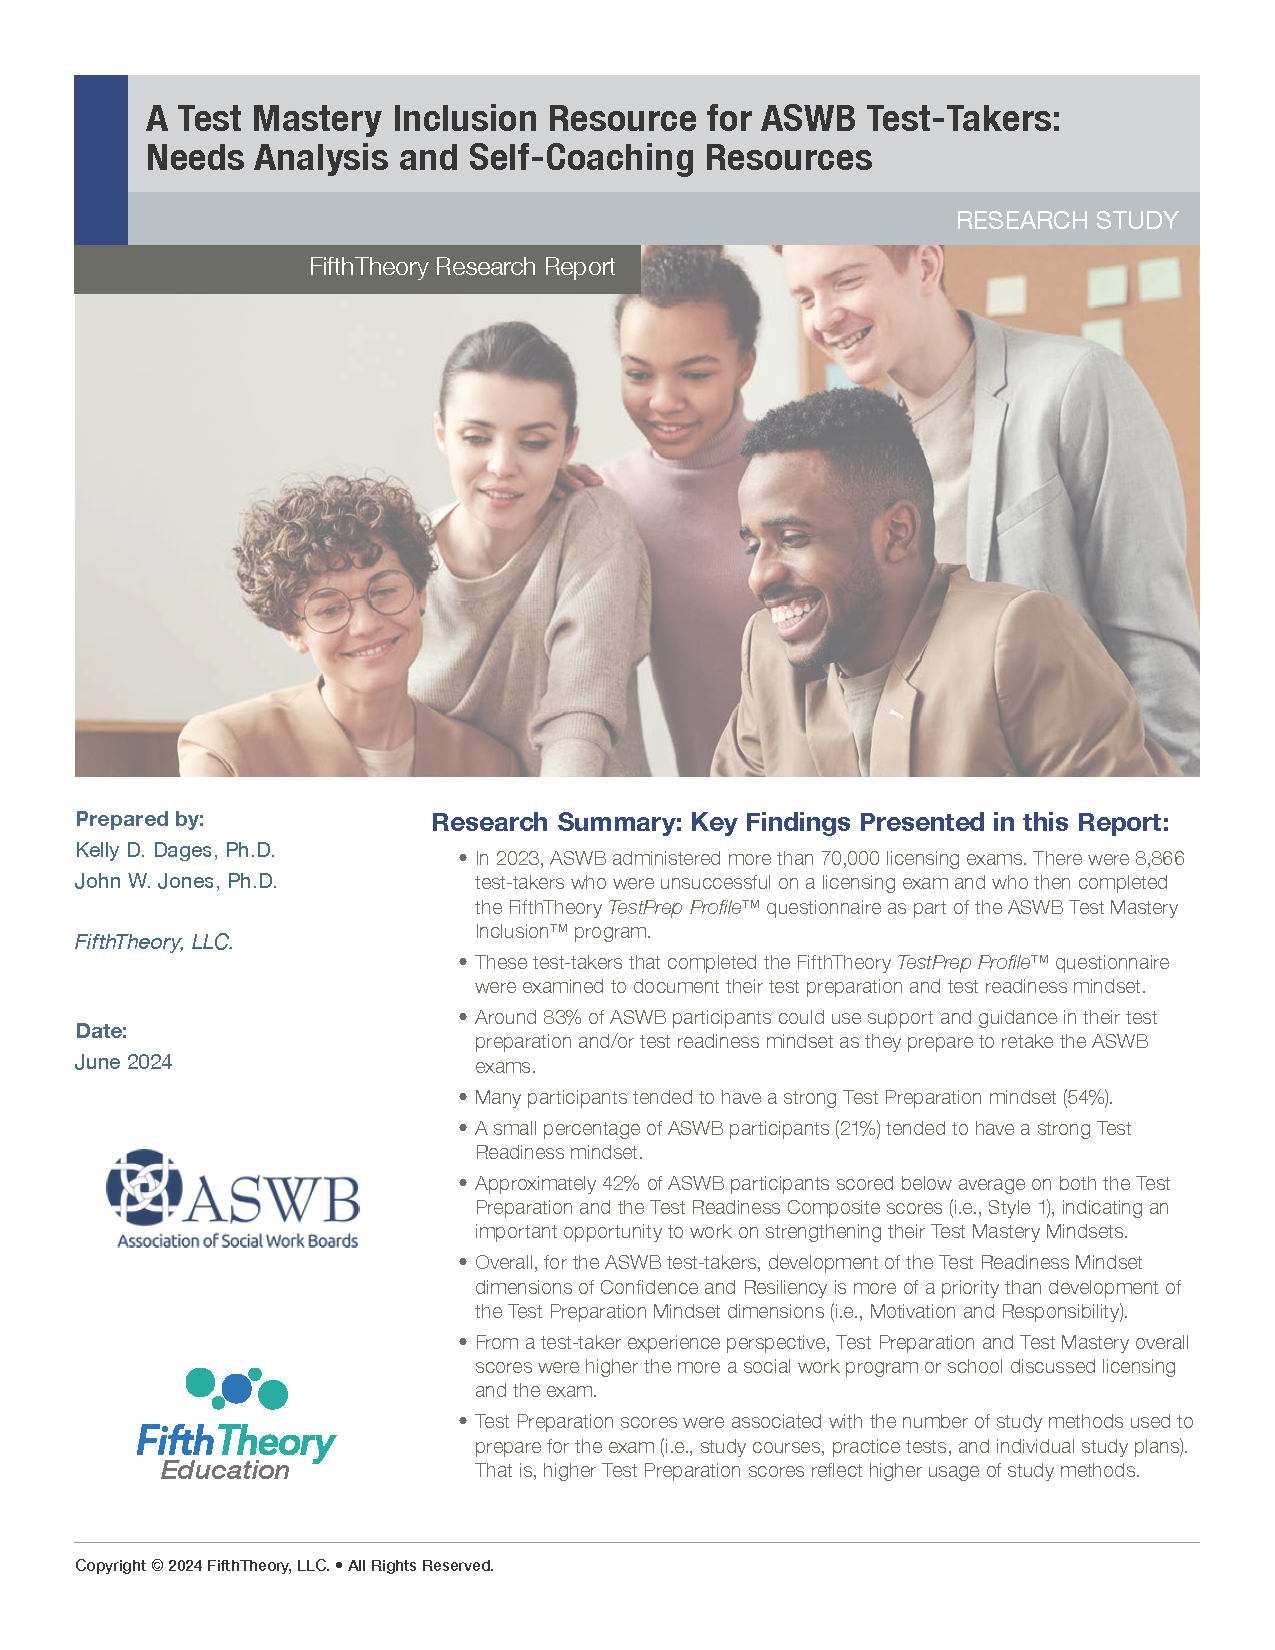 Cover page of a report reading "A Test Mastery Inclusion Resource for ASWB Test-Takers: Needs Analysis and Self-Coaching Resources